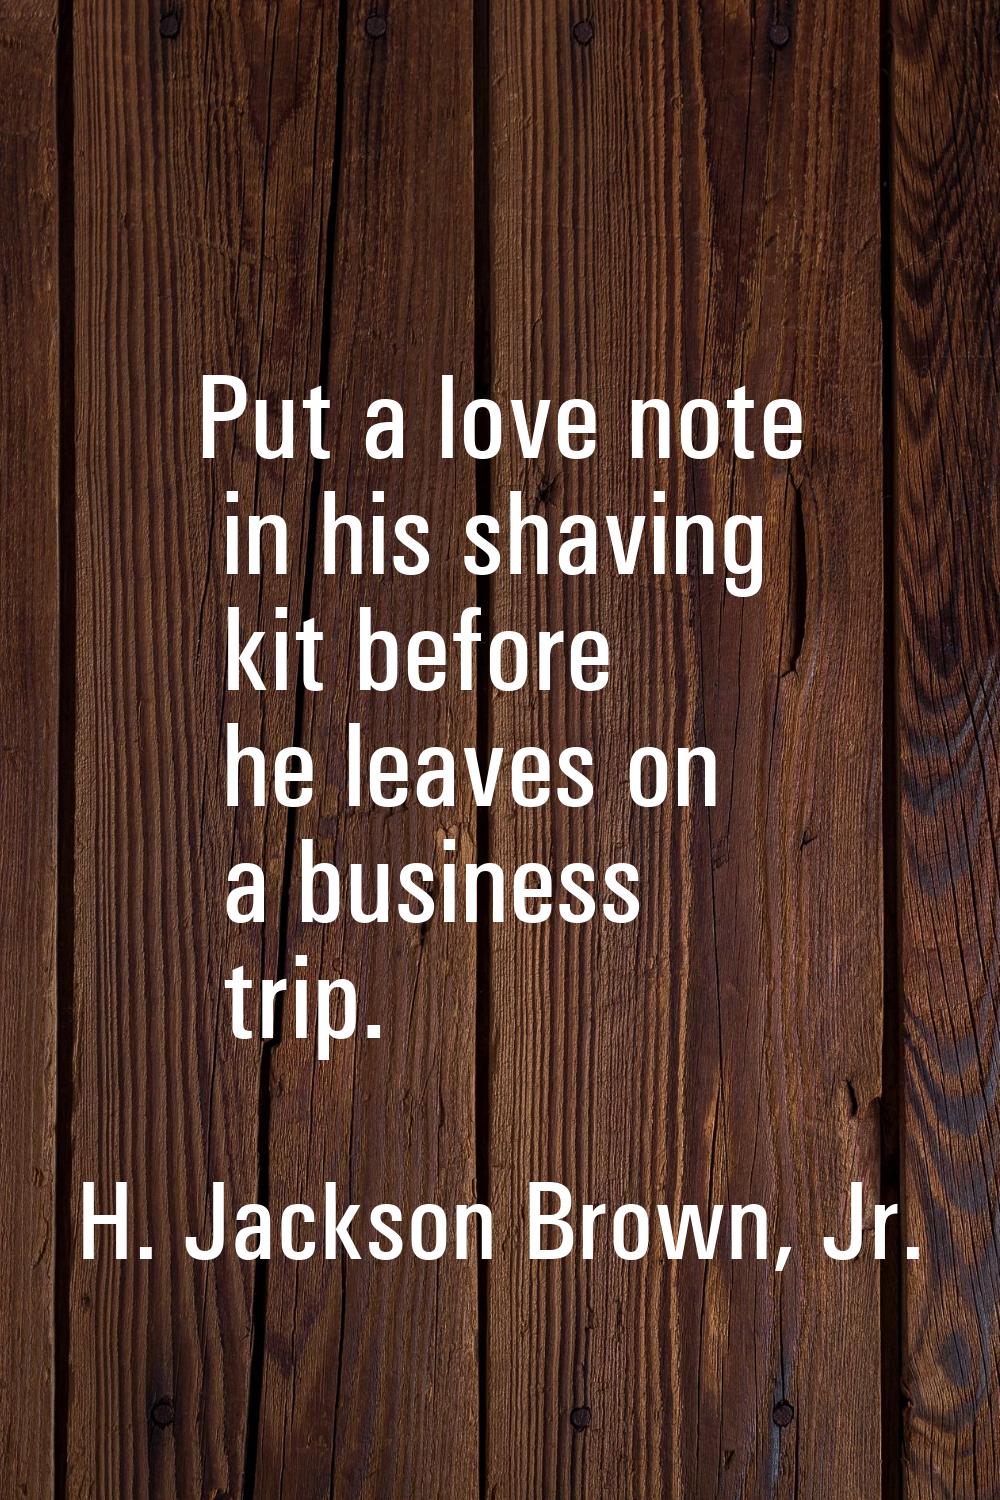 Put a love note in his shaving kit before he leaves on a business trip.